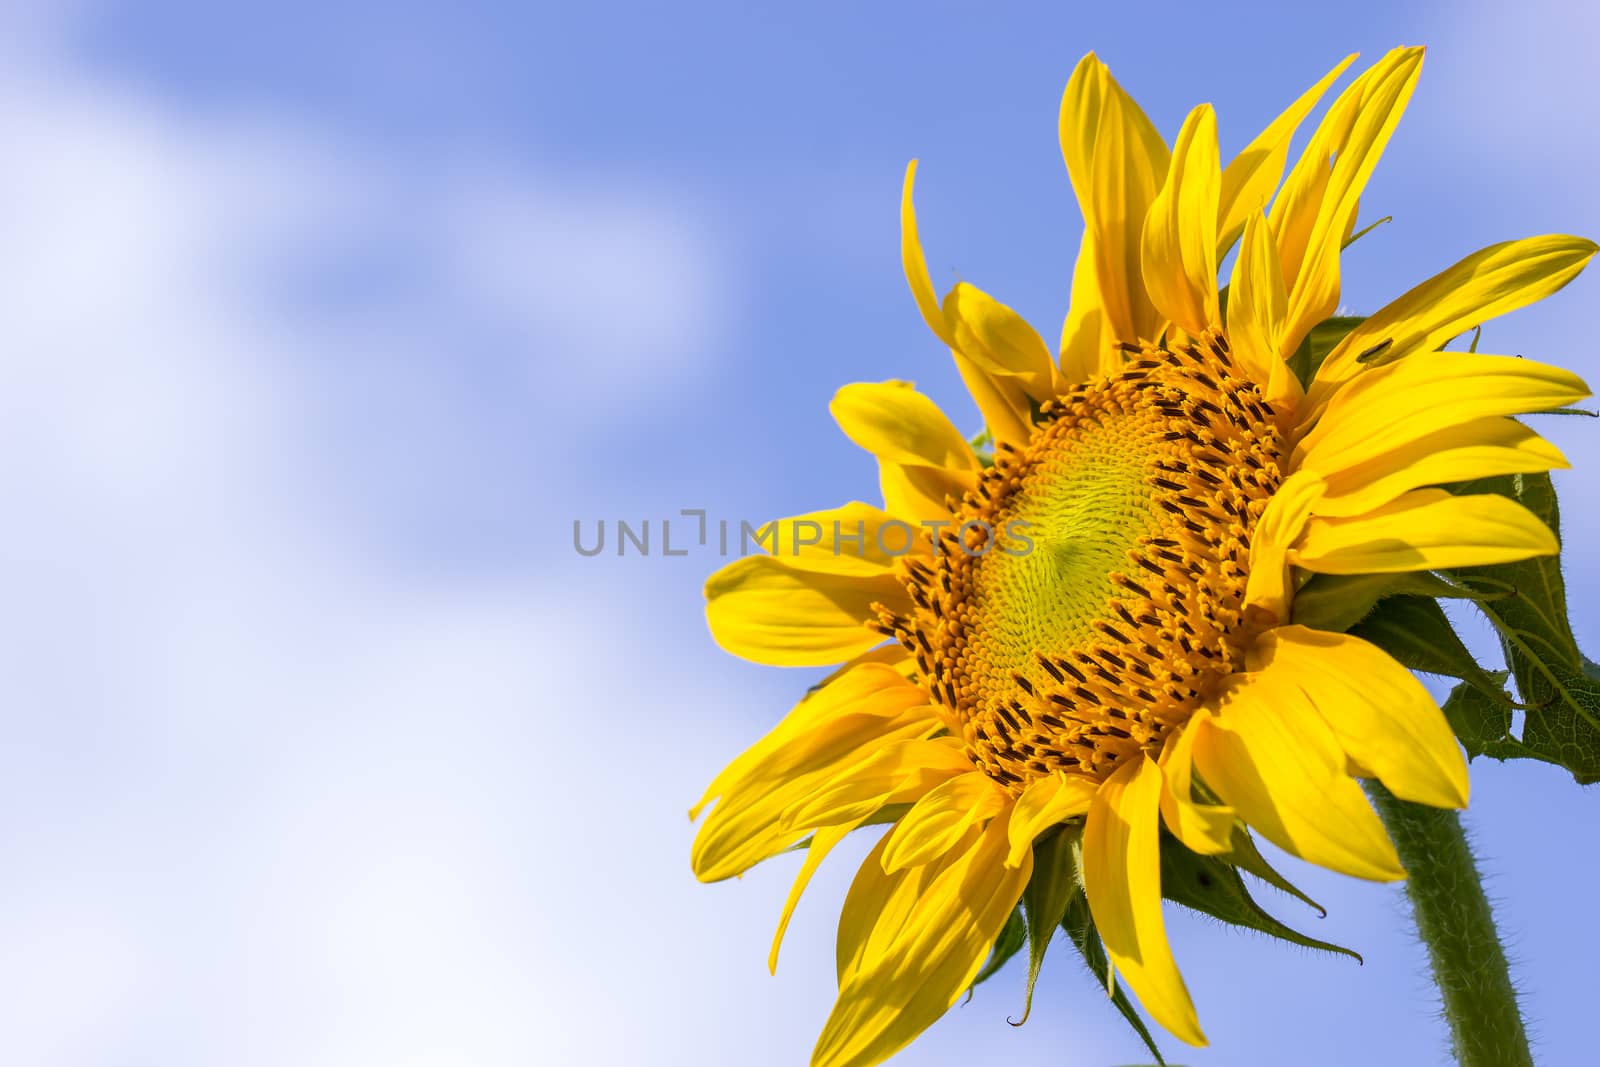 Sunflower in the hot sunlight on blue sky background. Suitable for backgrounds, articles about nature.